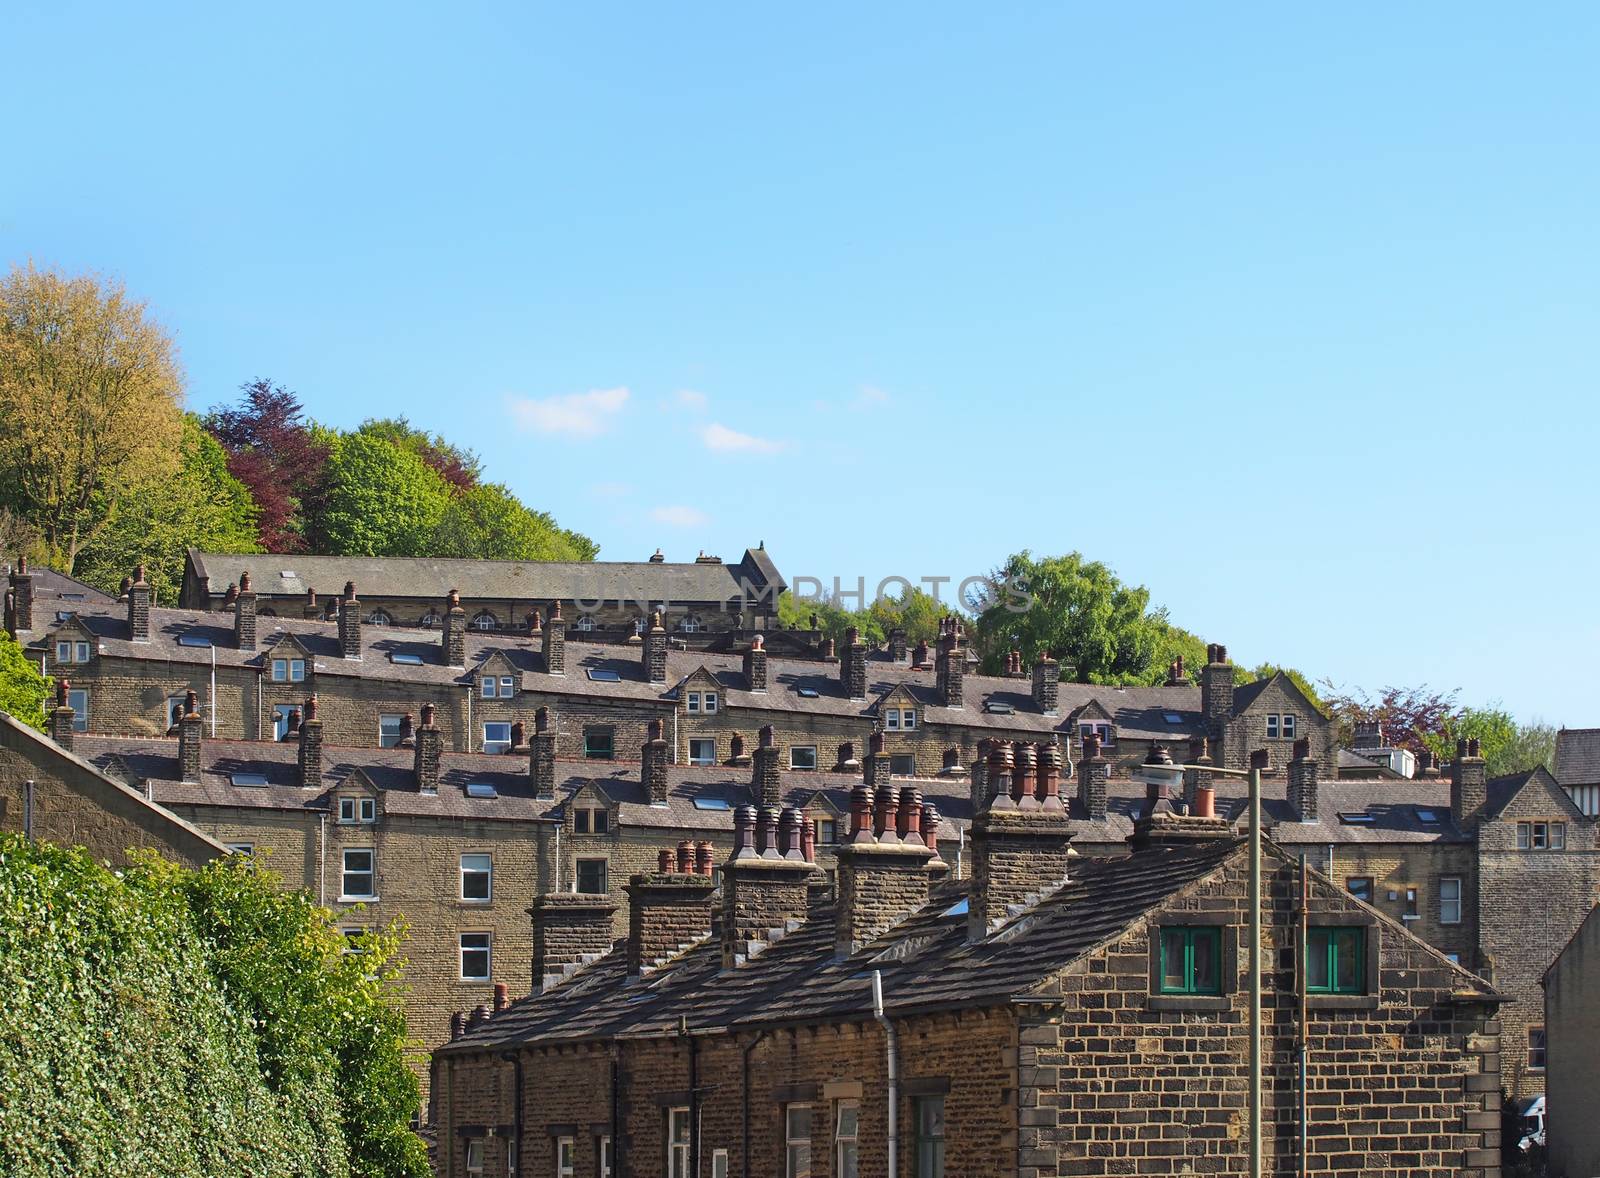 streets of terraced stone houses on a hillside surrounded by trees with a blue summer sky in hebden bridge west yorkshire